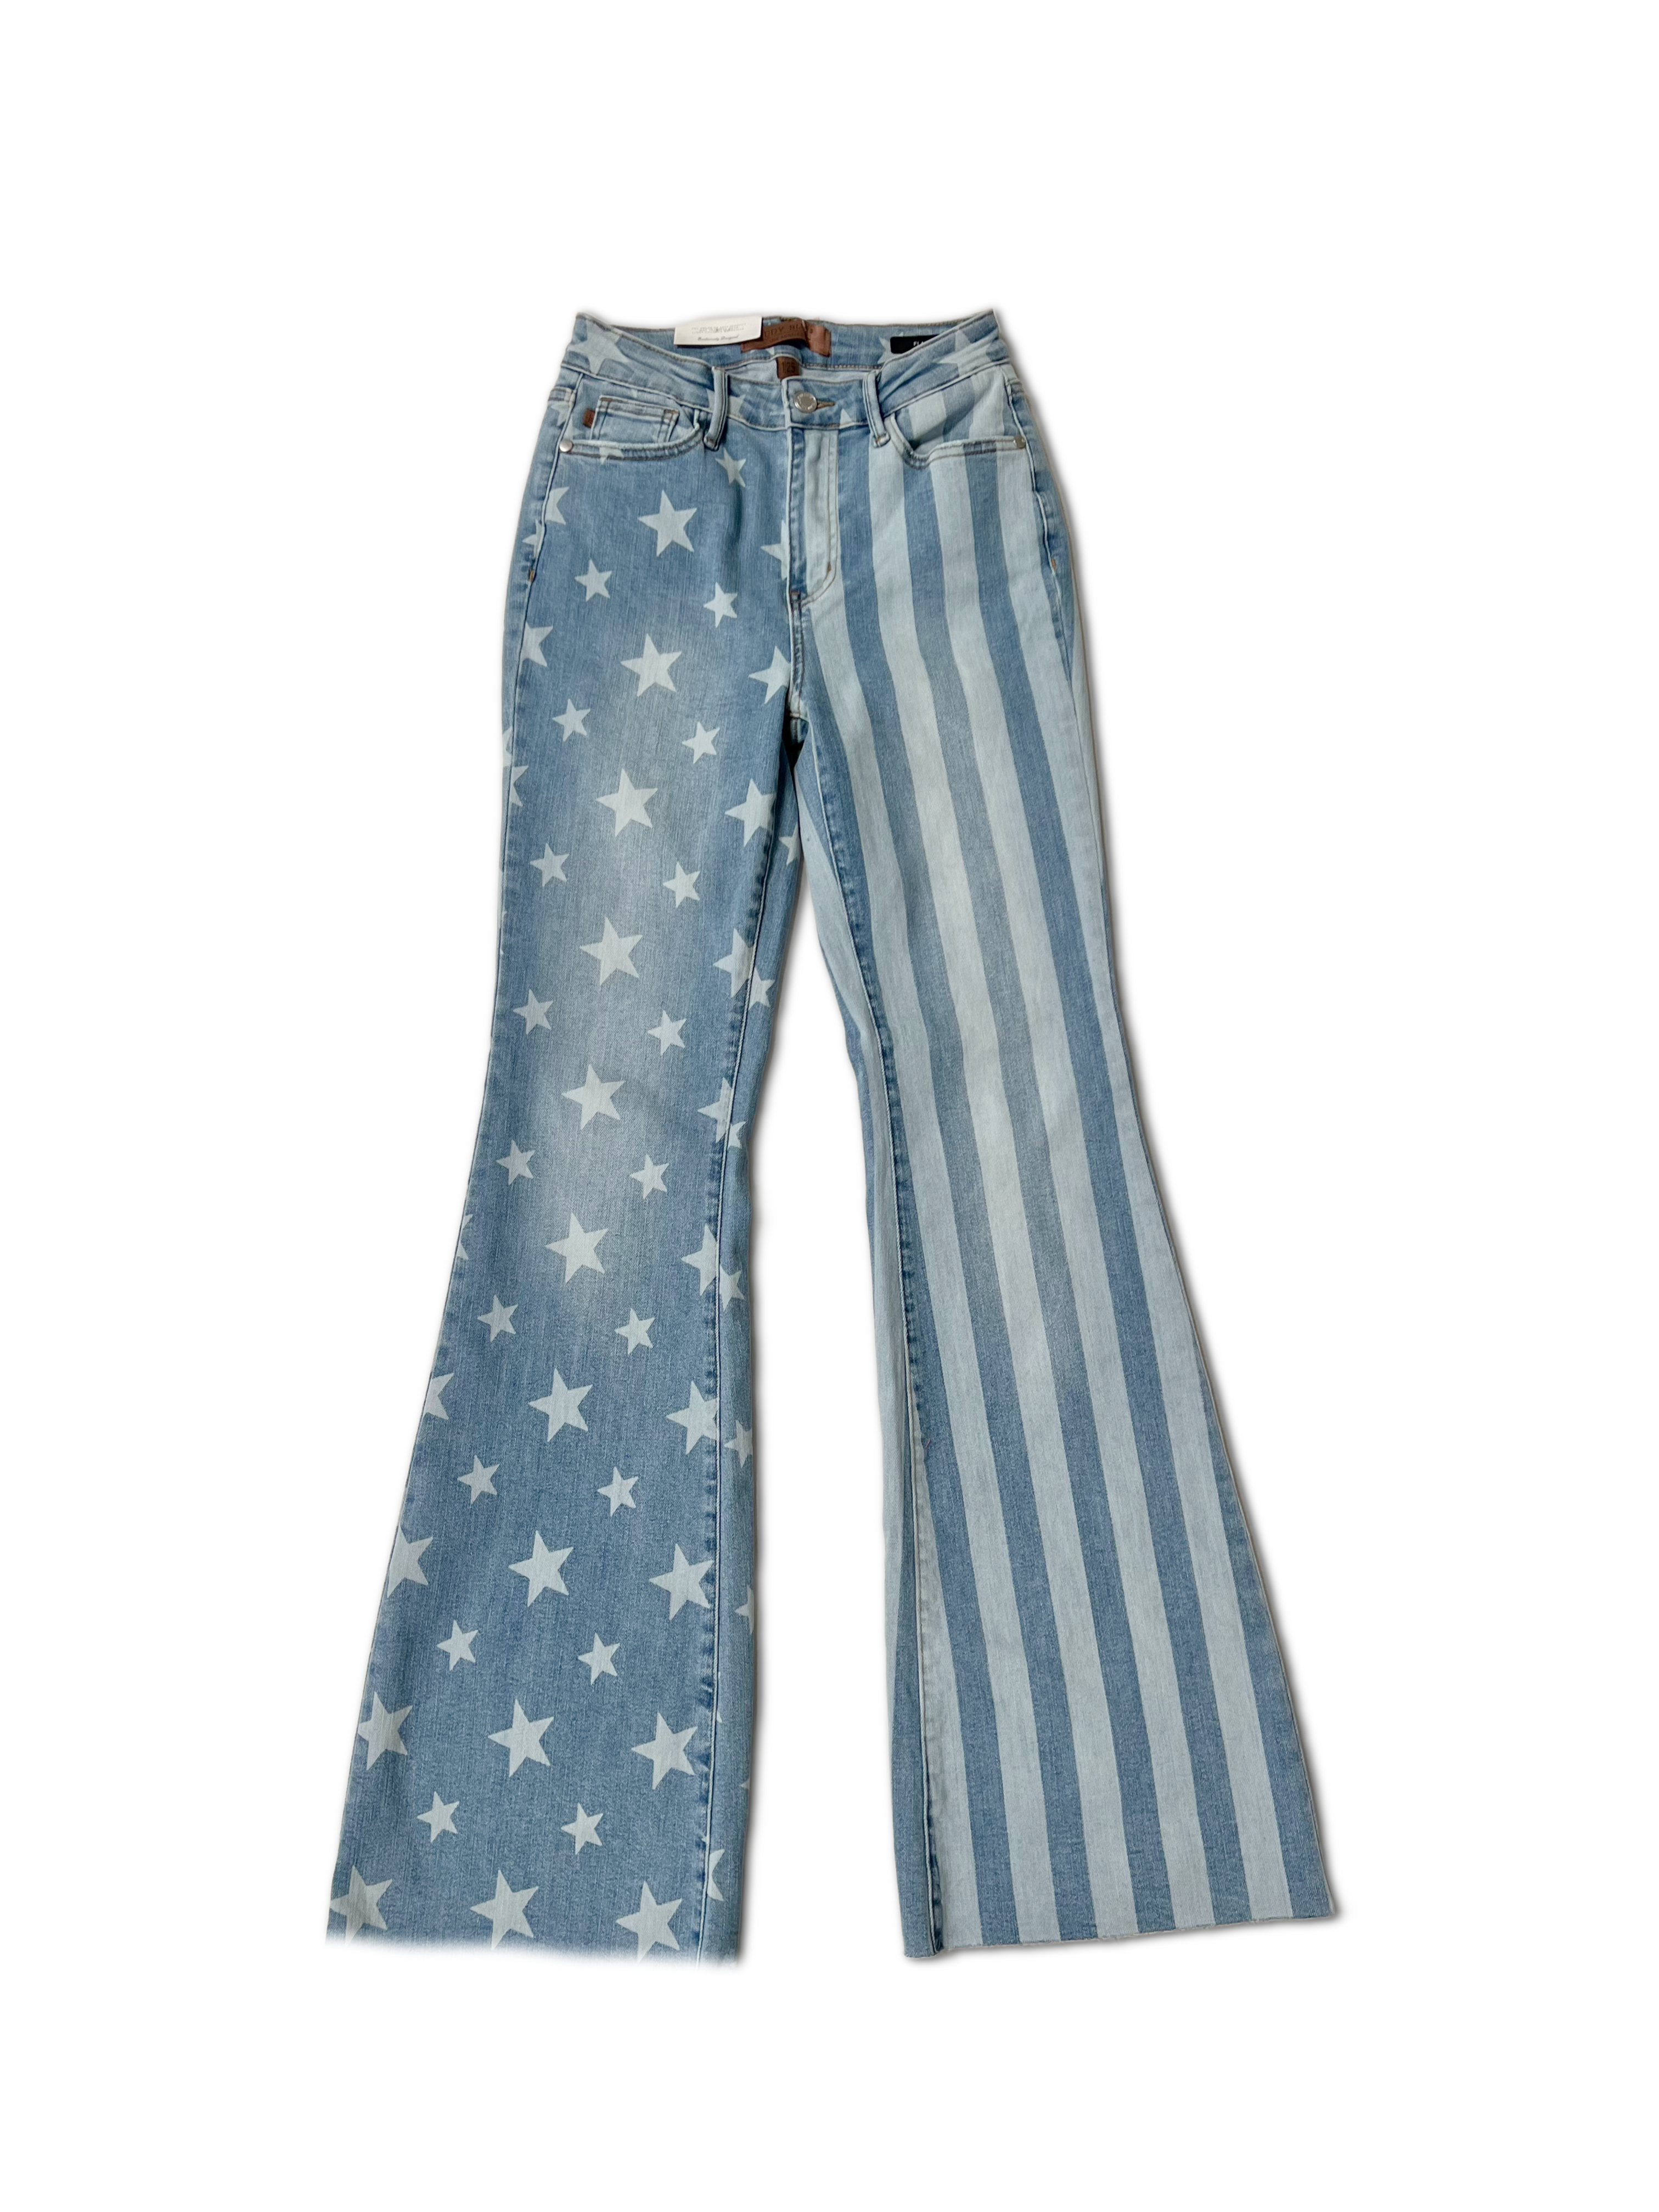 Judy Blue Flares Freedom Rings Stars and Stripes JB Boutique Simplified